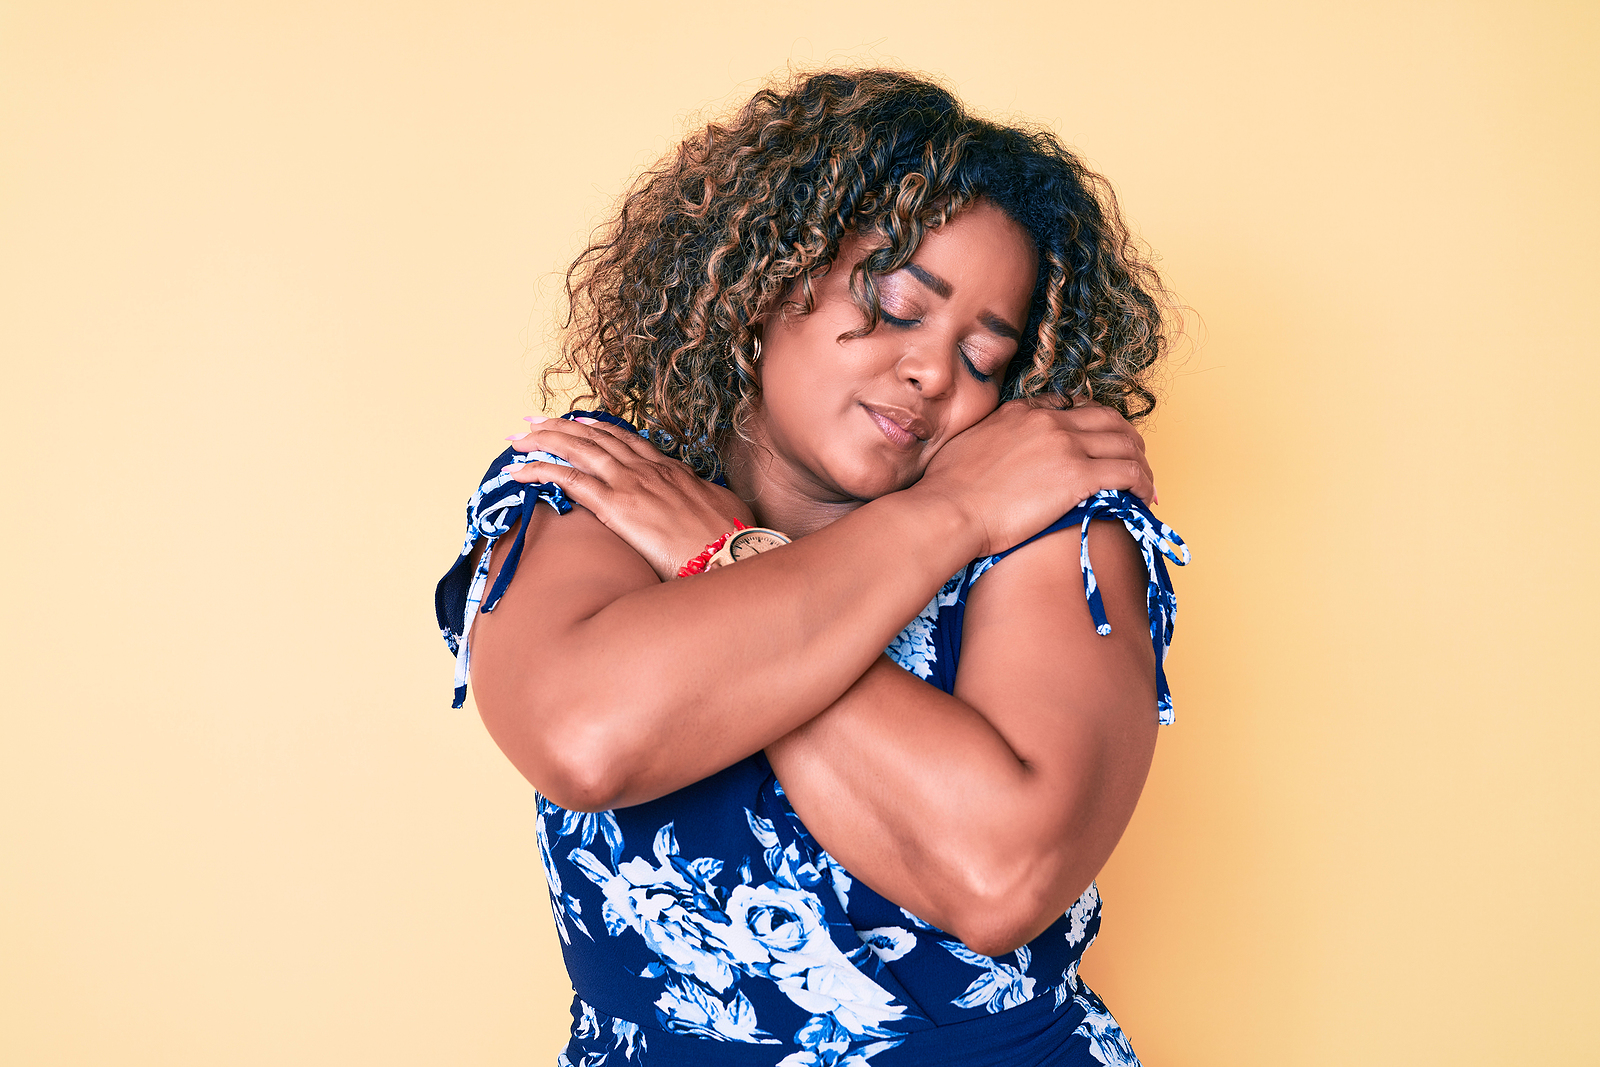 Black woman in blue hugging self. You‘re worthy of love and acceptance of who you are. If you’re dealing body image issues or are struggling with binge eating we can help. We offer eating disorder treatment in brevard county, fl and anorexia treatment. If you’re ready to move forward begin online therapy in Florida today!